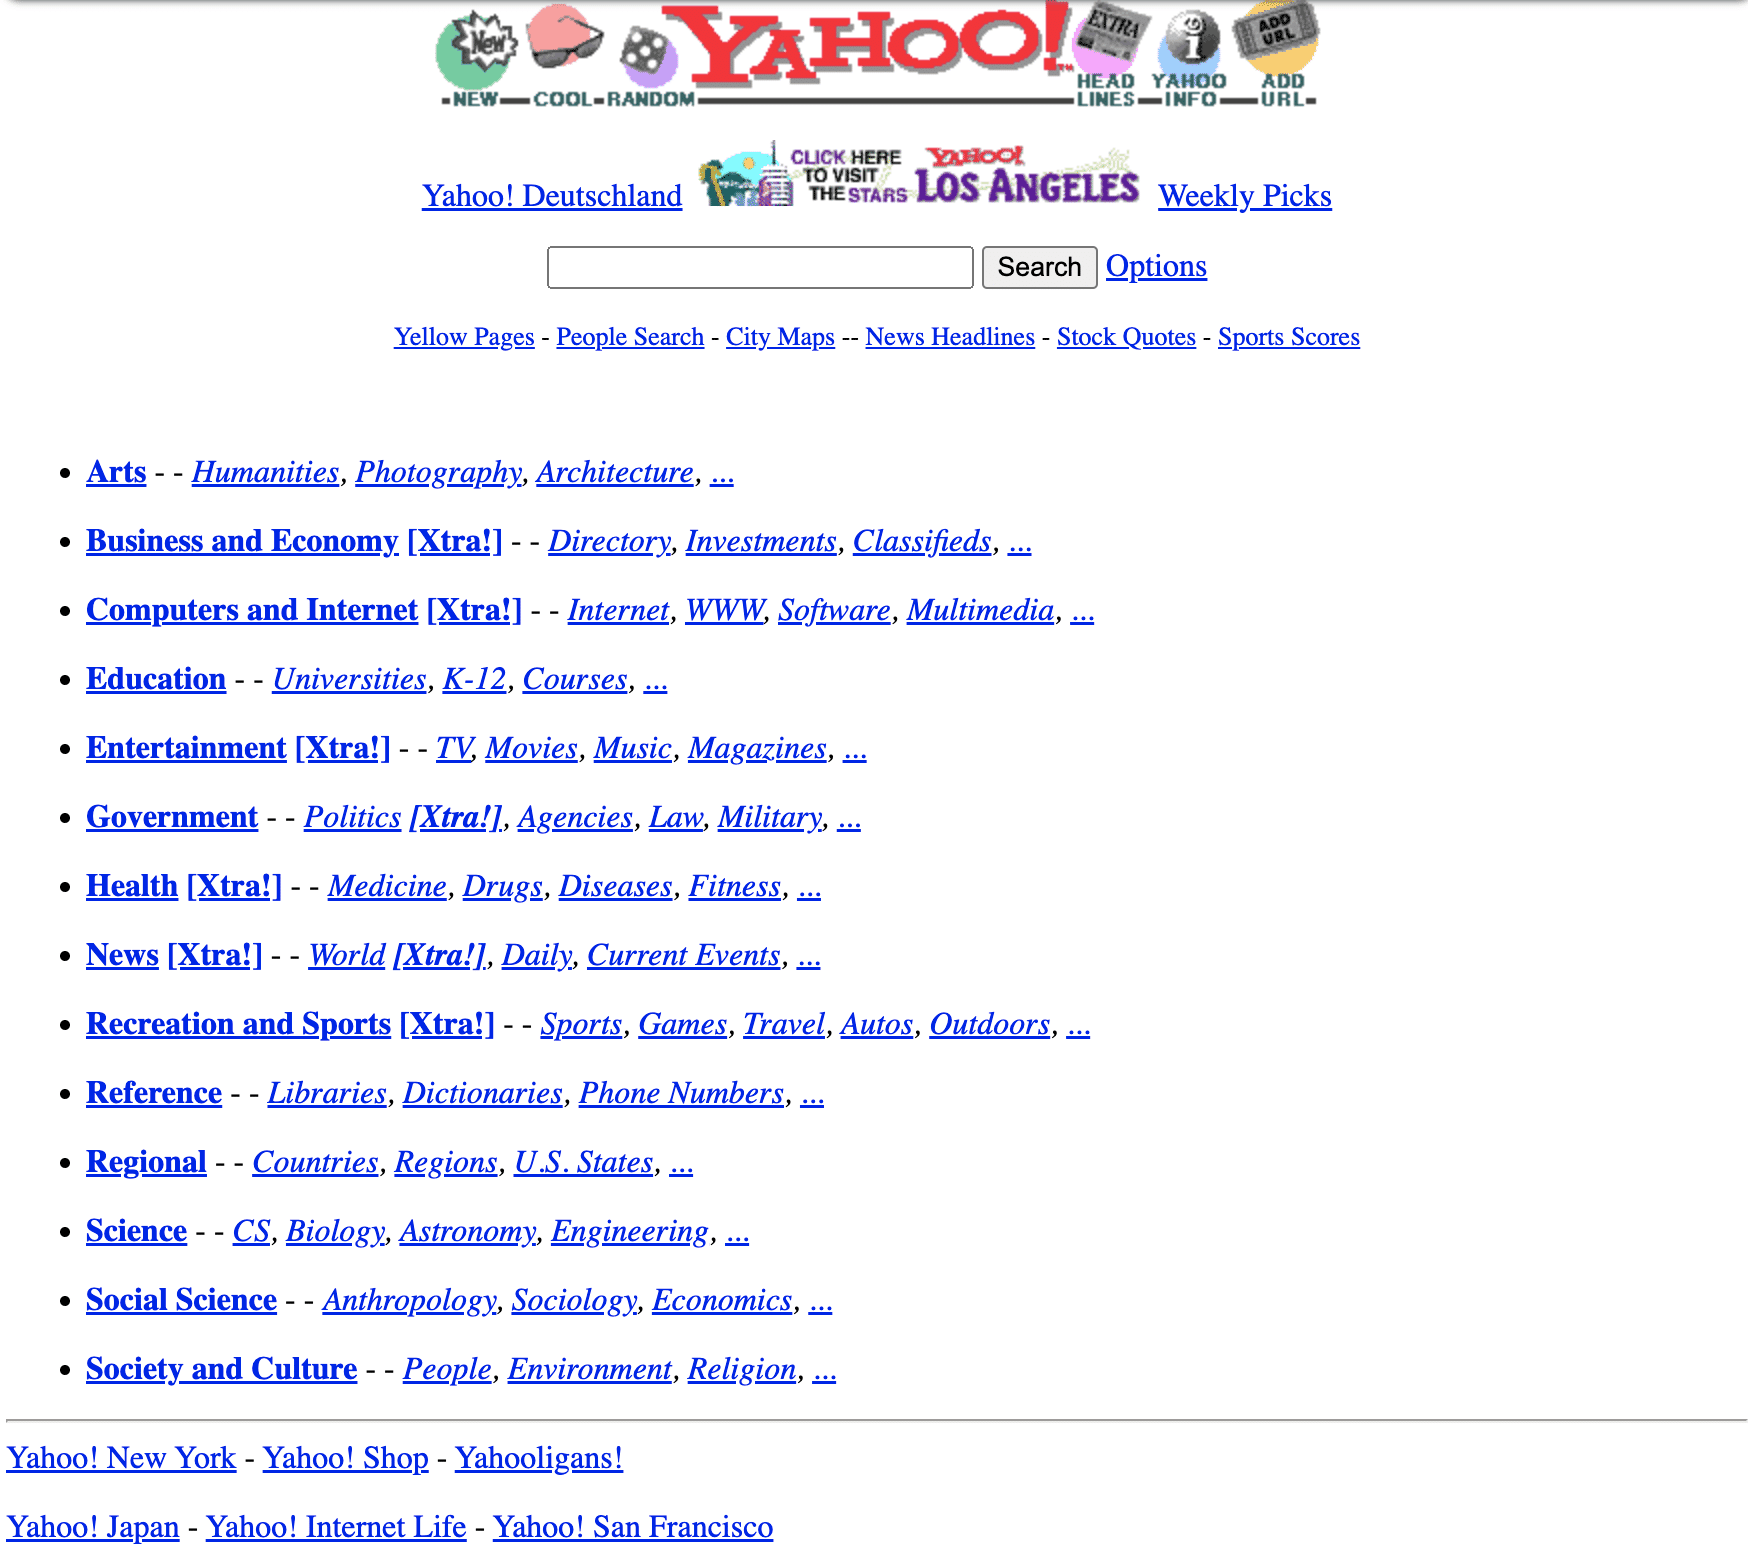 The homepage of the Yahoo website in its early days.